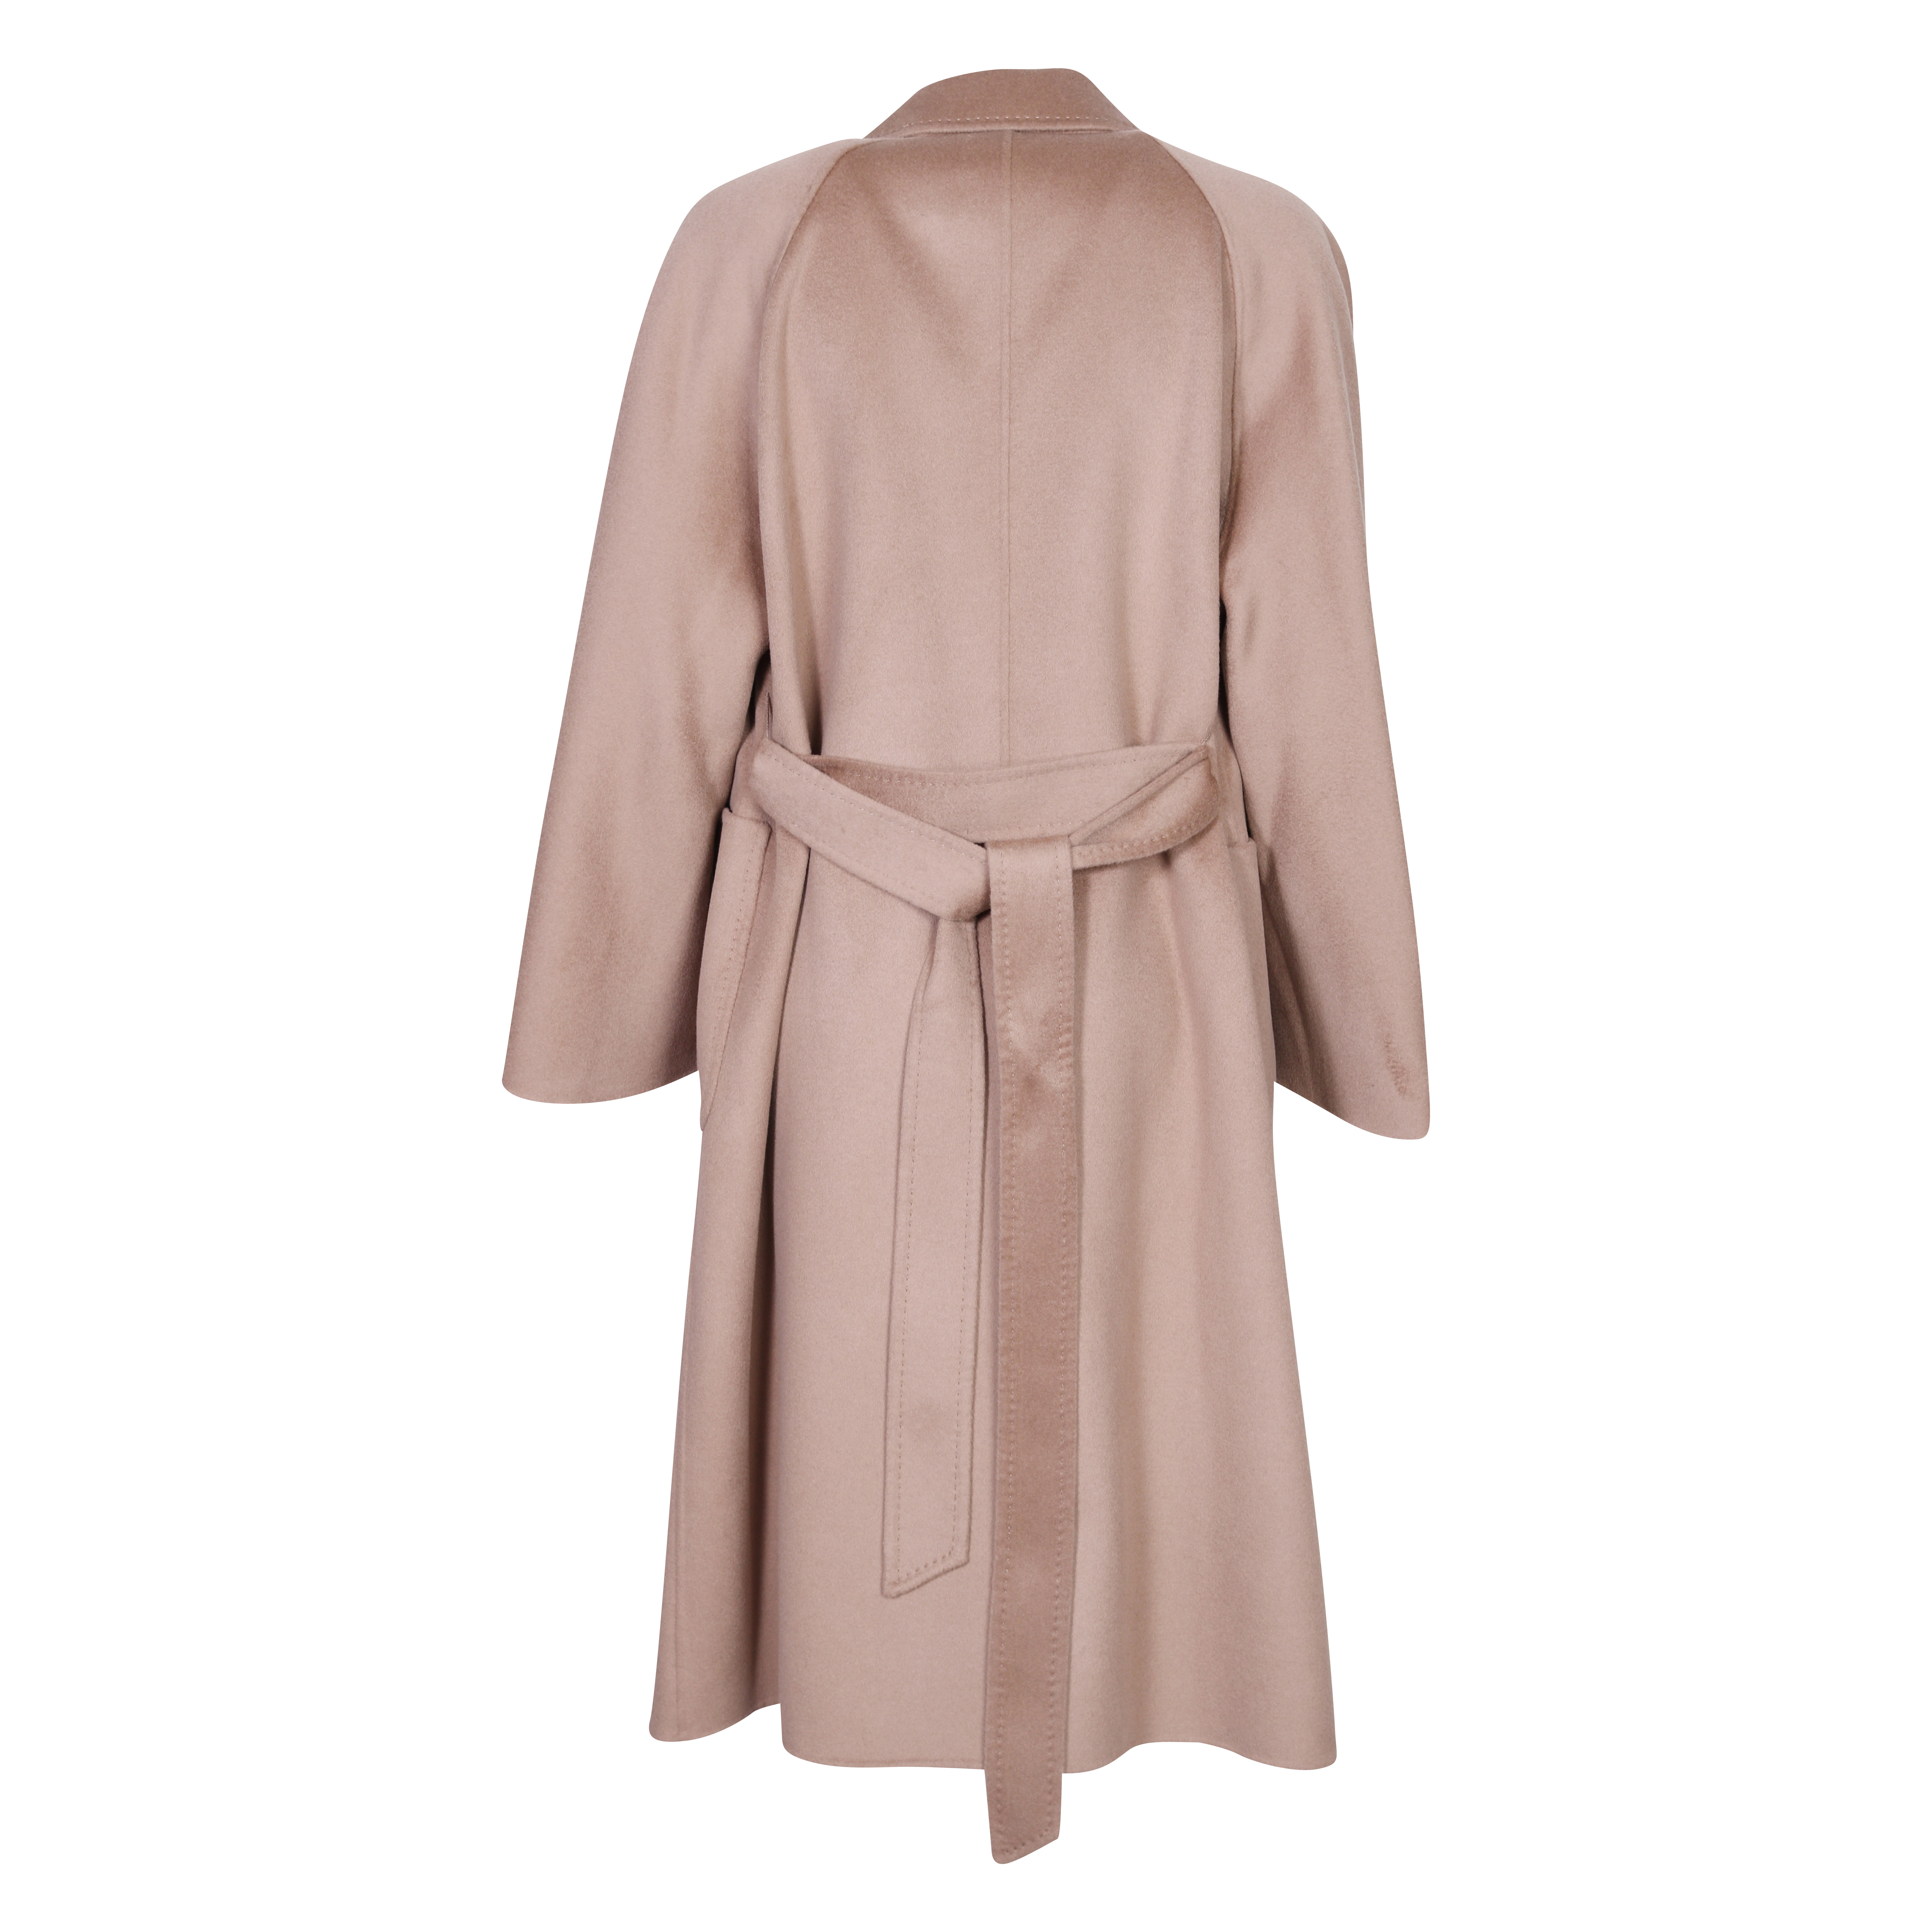 Flona Wool/Cashmere Coat in Taupe M/L